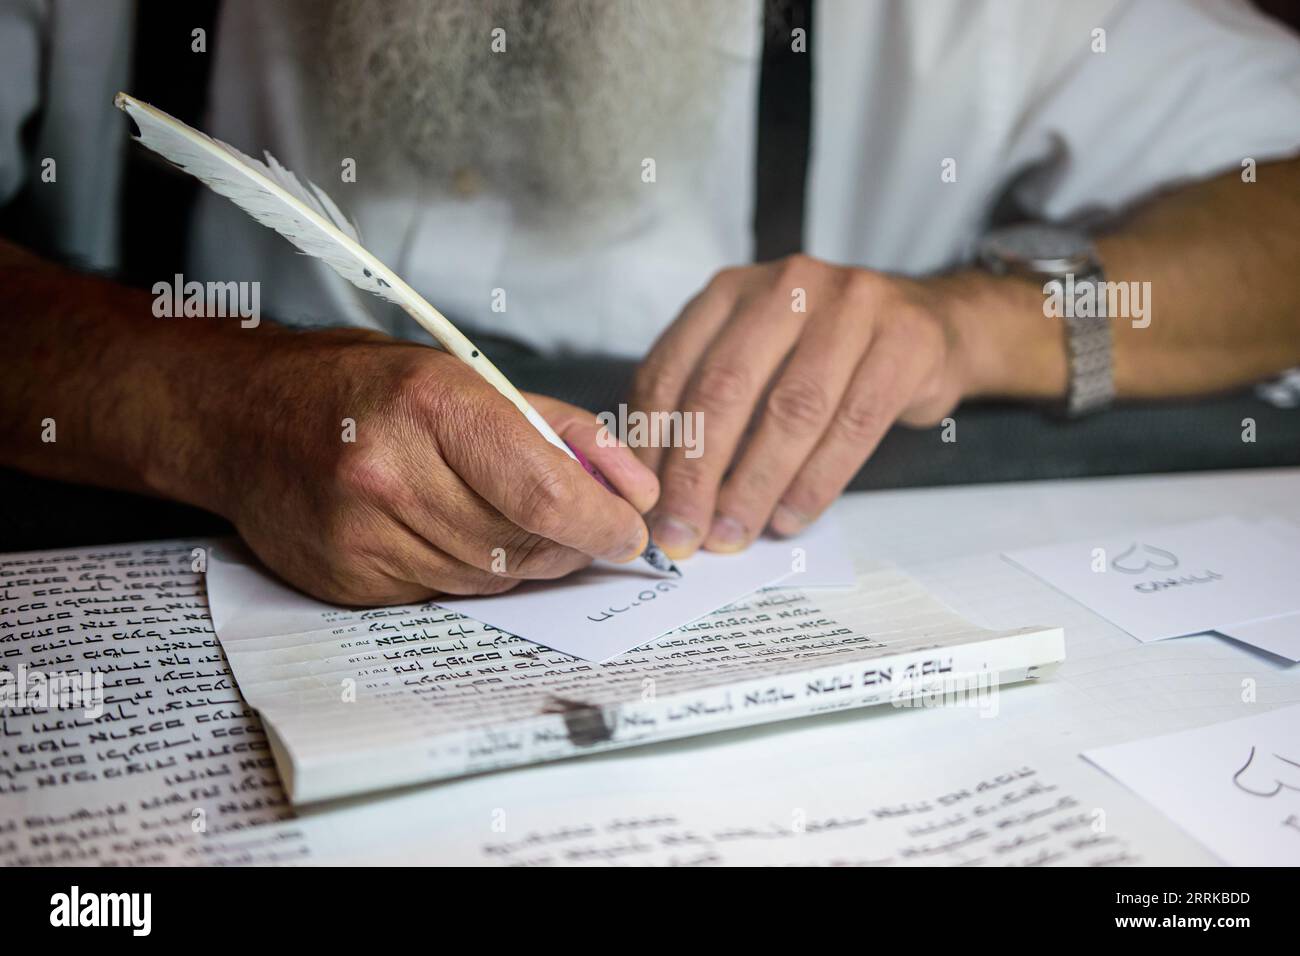 A mature male is seated at a desk, writing on a piece of paper with a quill pen Stock Photo